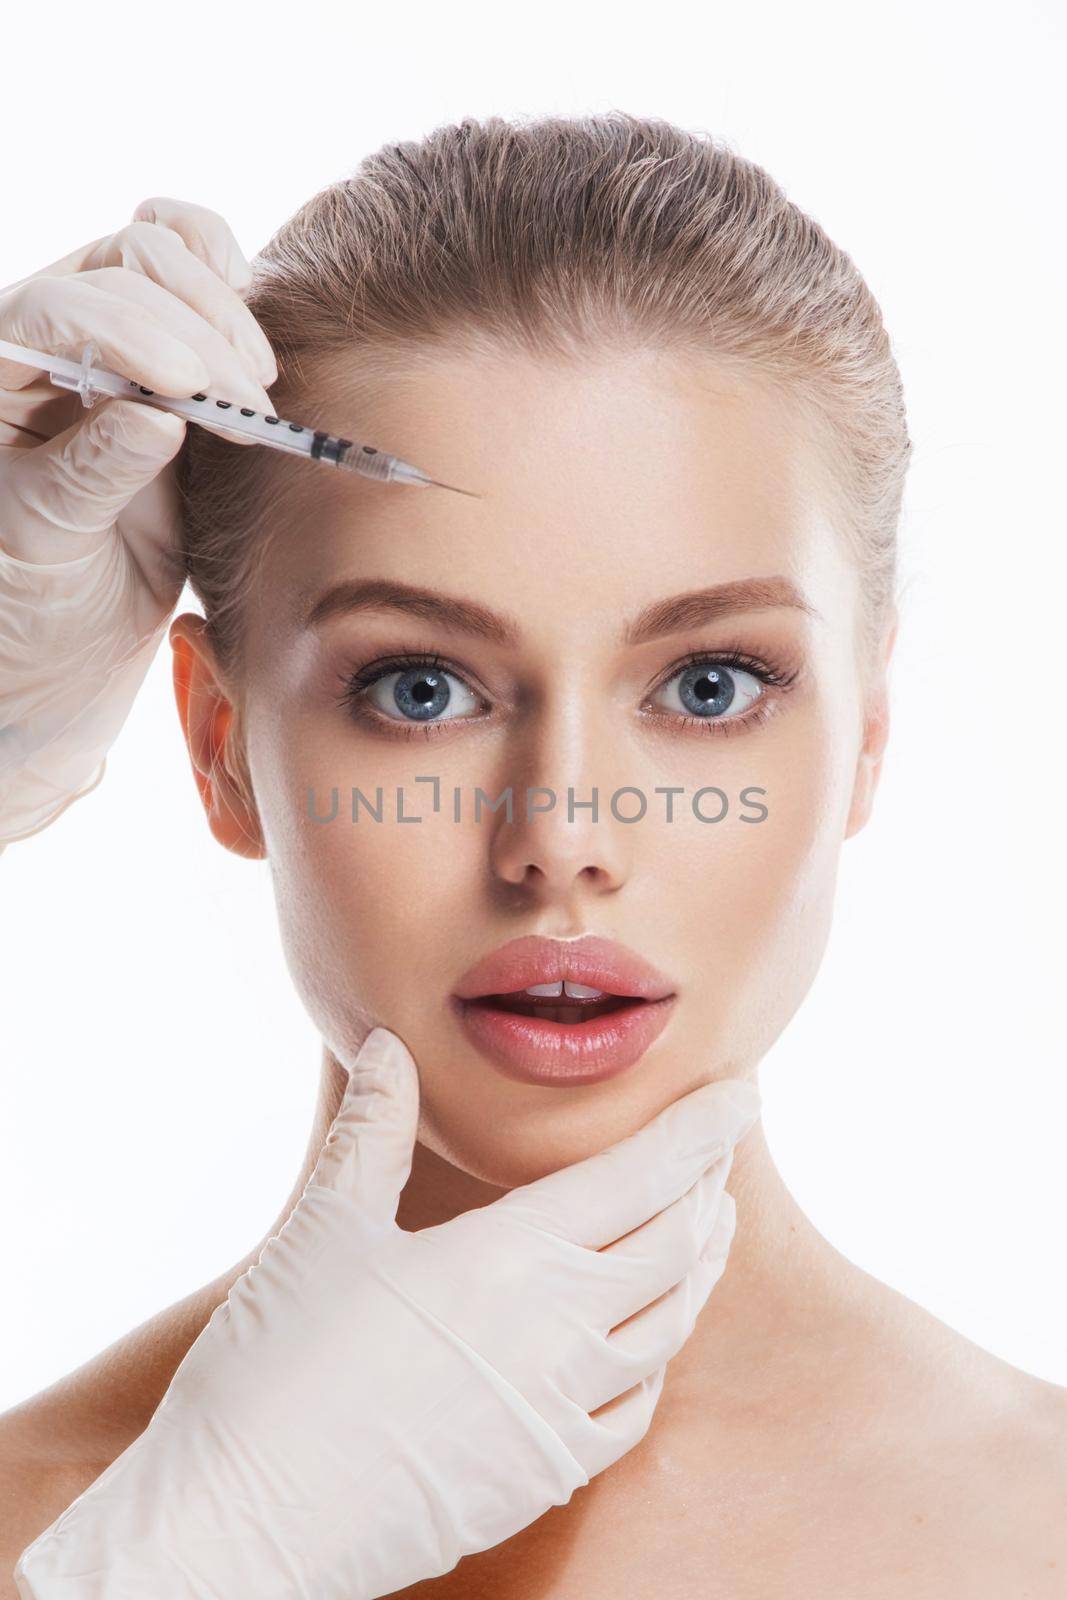 Cosmetic injection to the pretty woman face beauty shot, isolated on white background